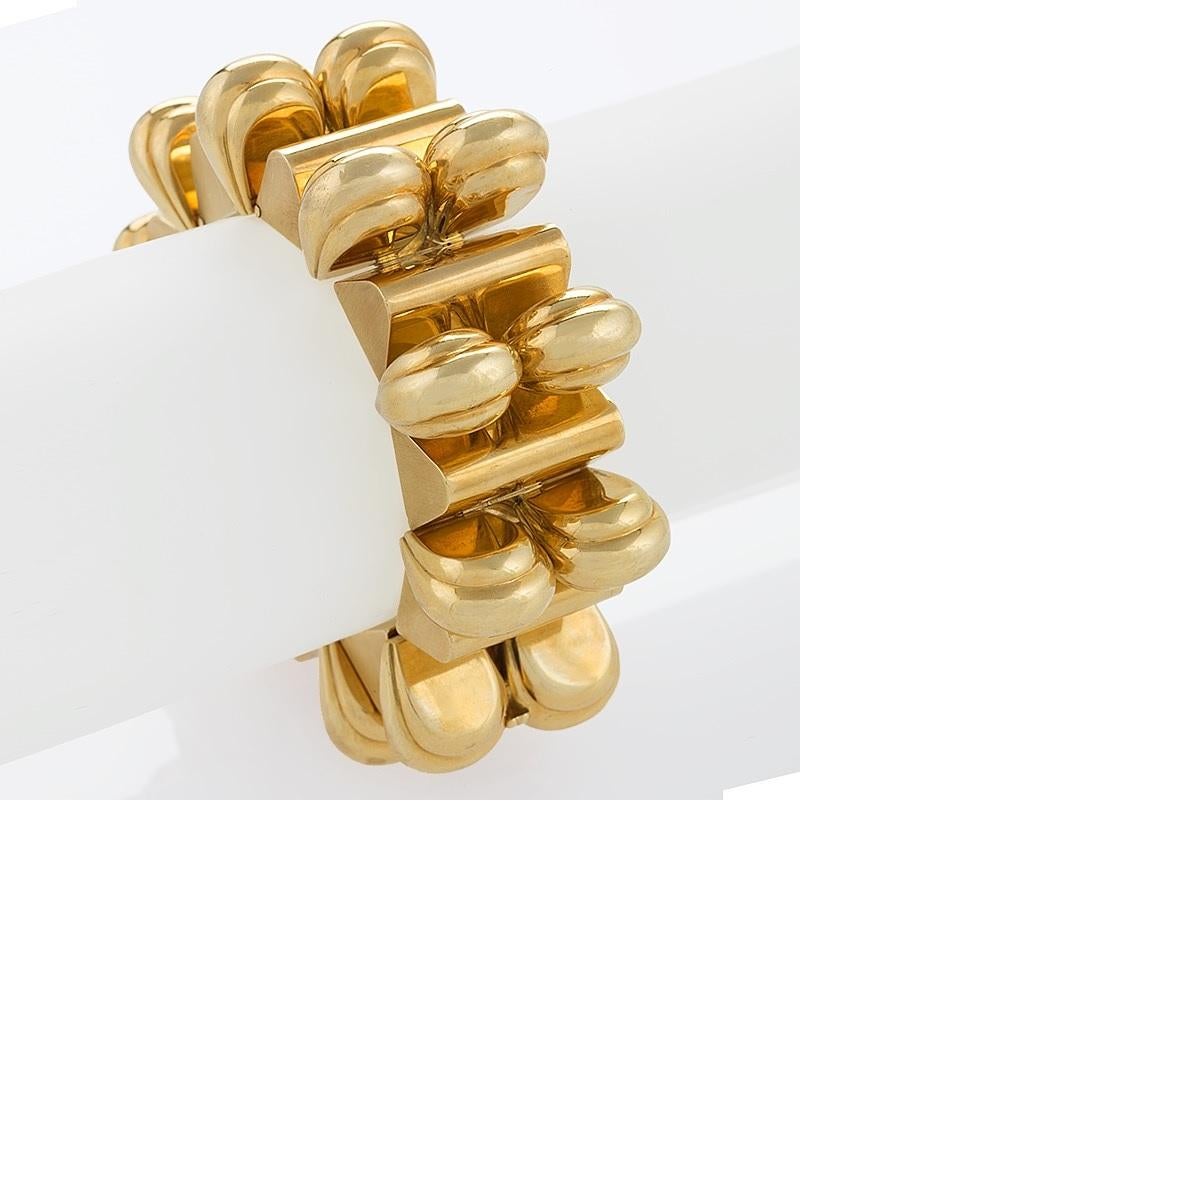 The bold, sculptural design of this Universal Genève gold link bracelet is a splendid example of mid-20th century modernism. This chunky bracelet features alternating bars and arches, creating a powerful architectural presence. The considered